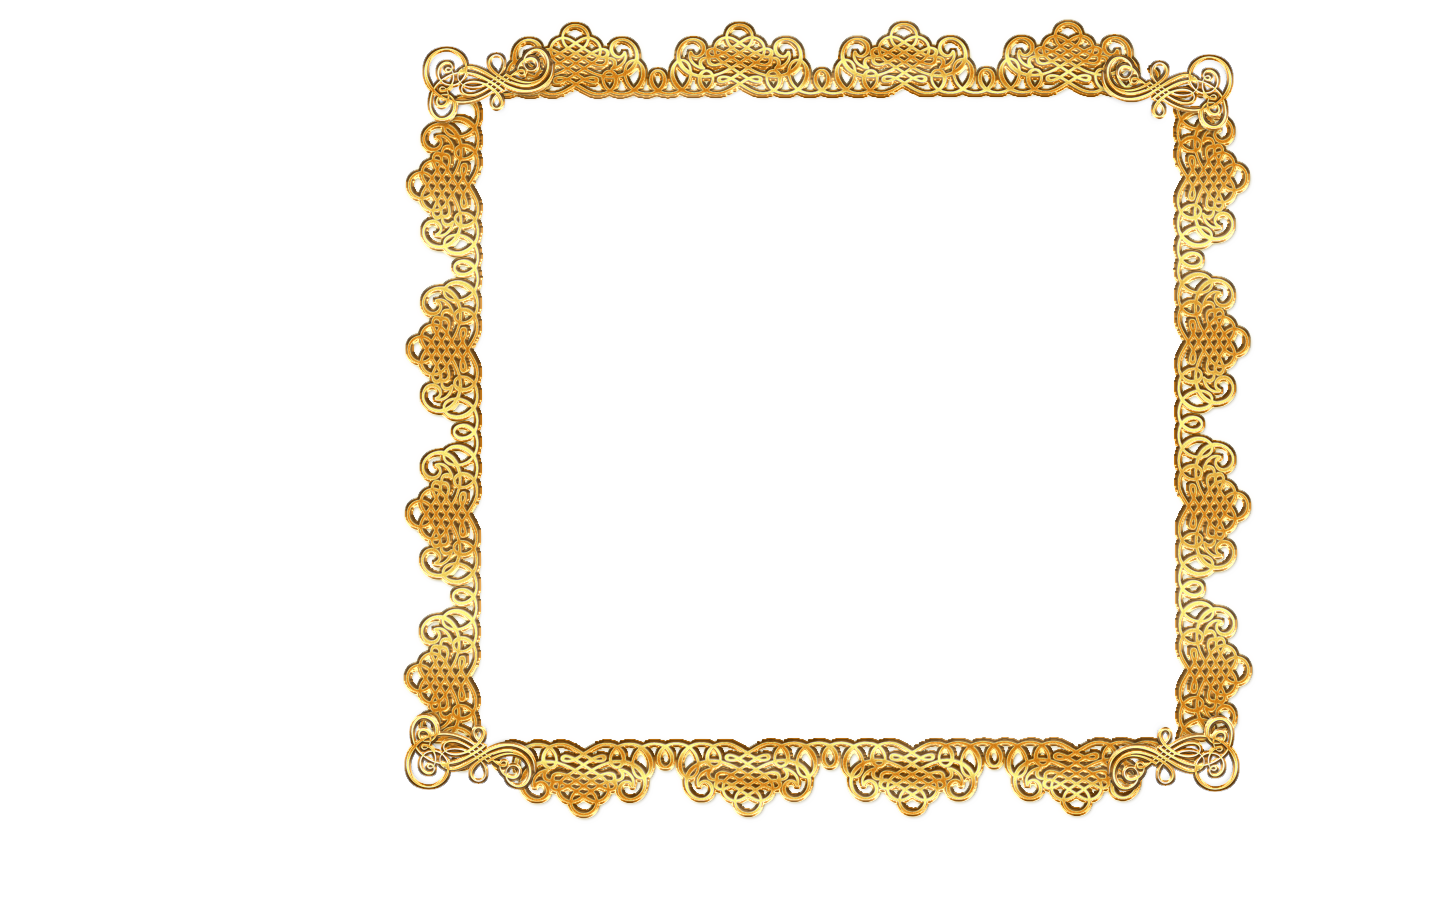 Gold Scroll Frame Clip Art   Clipart Panda   Free Clipart Images